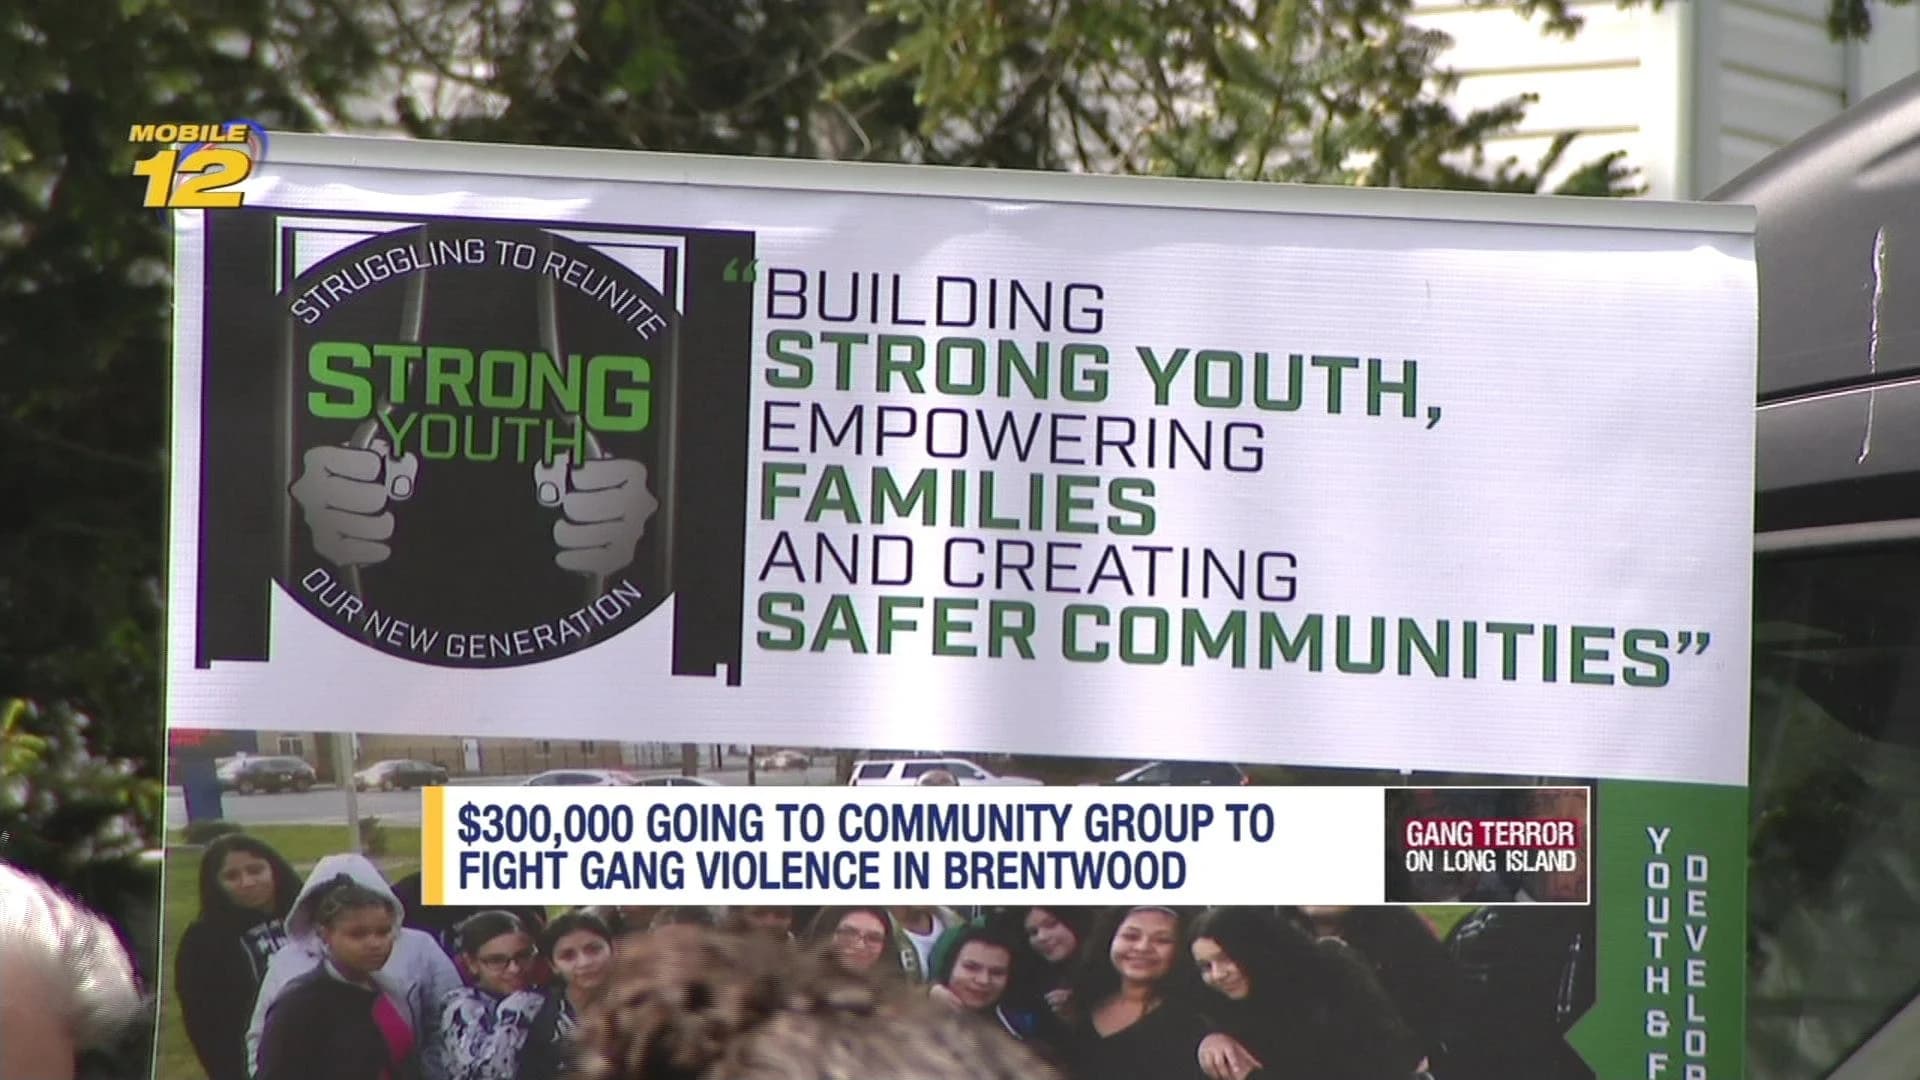 $300K secured for STRONG Youth anti-gang group in Suffolk